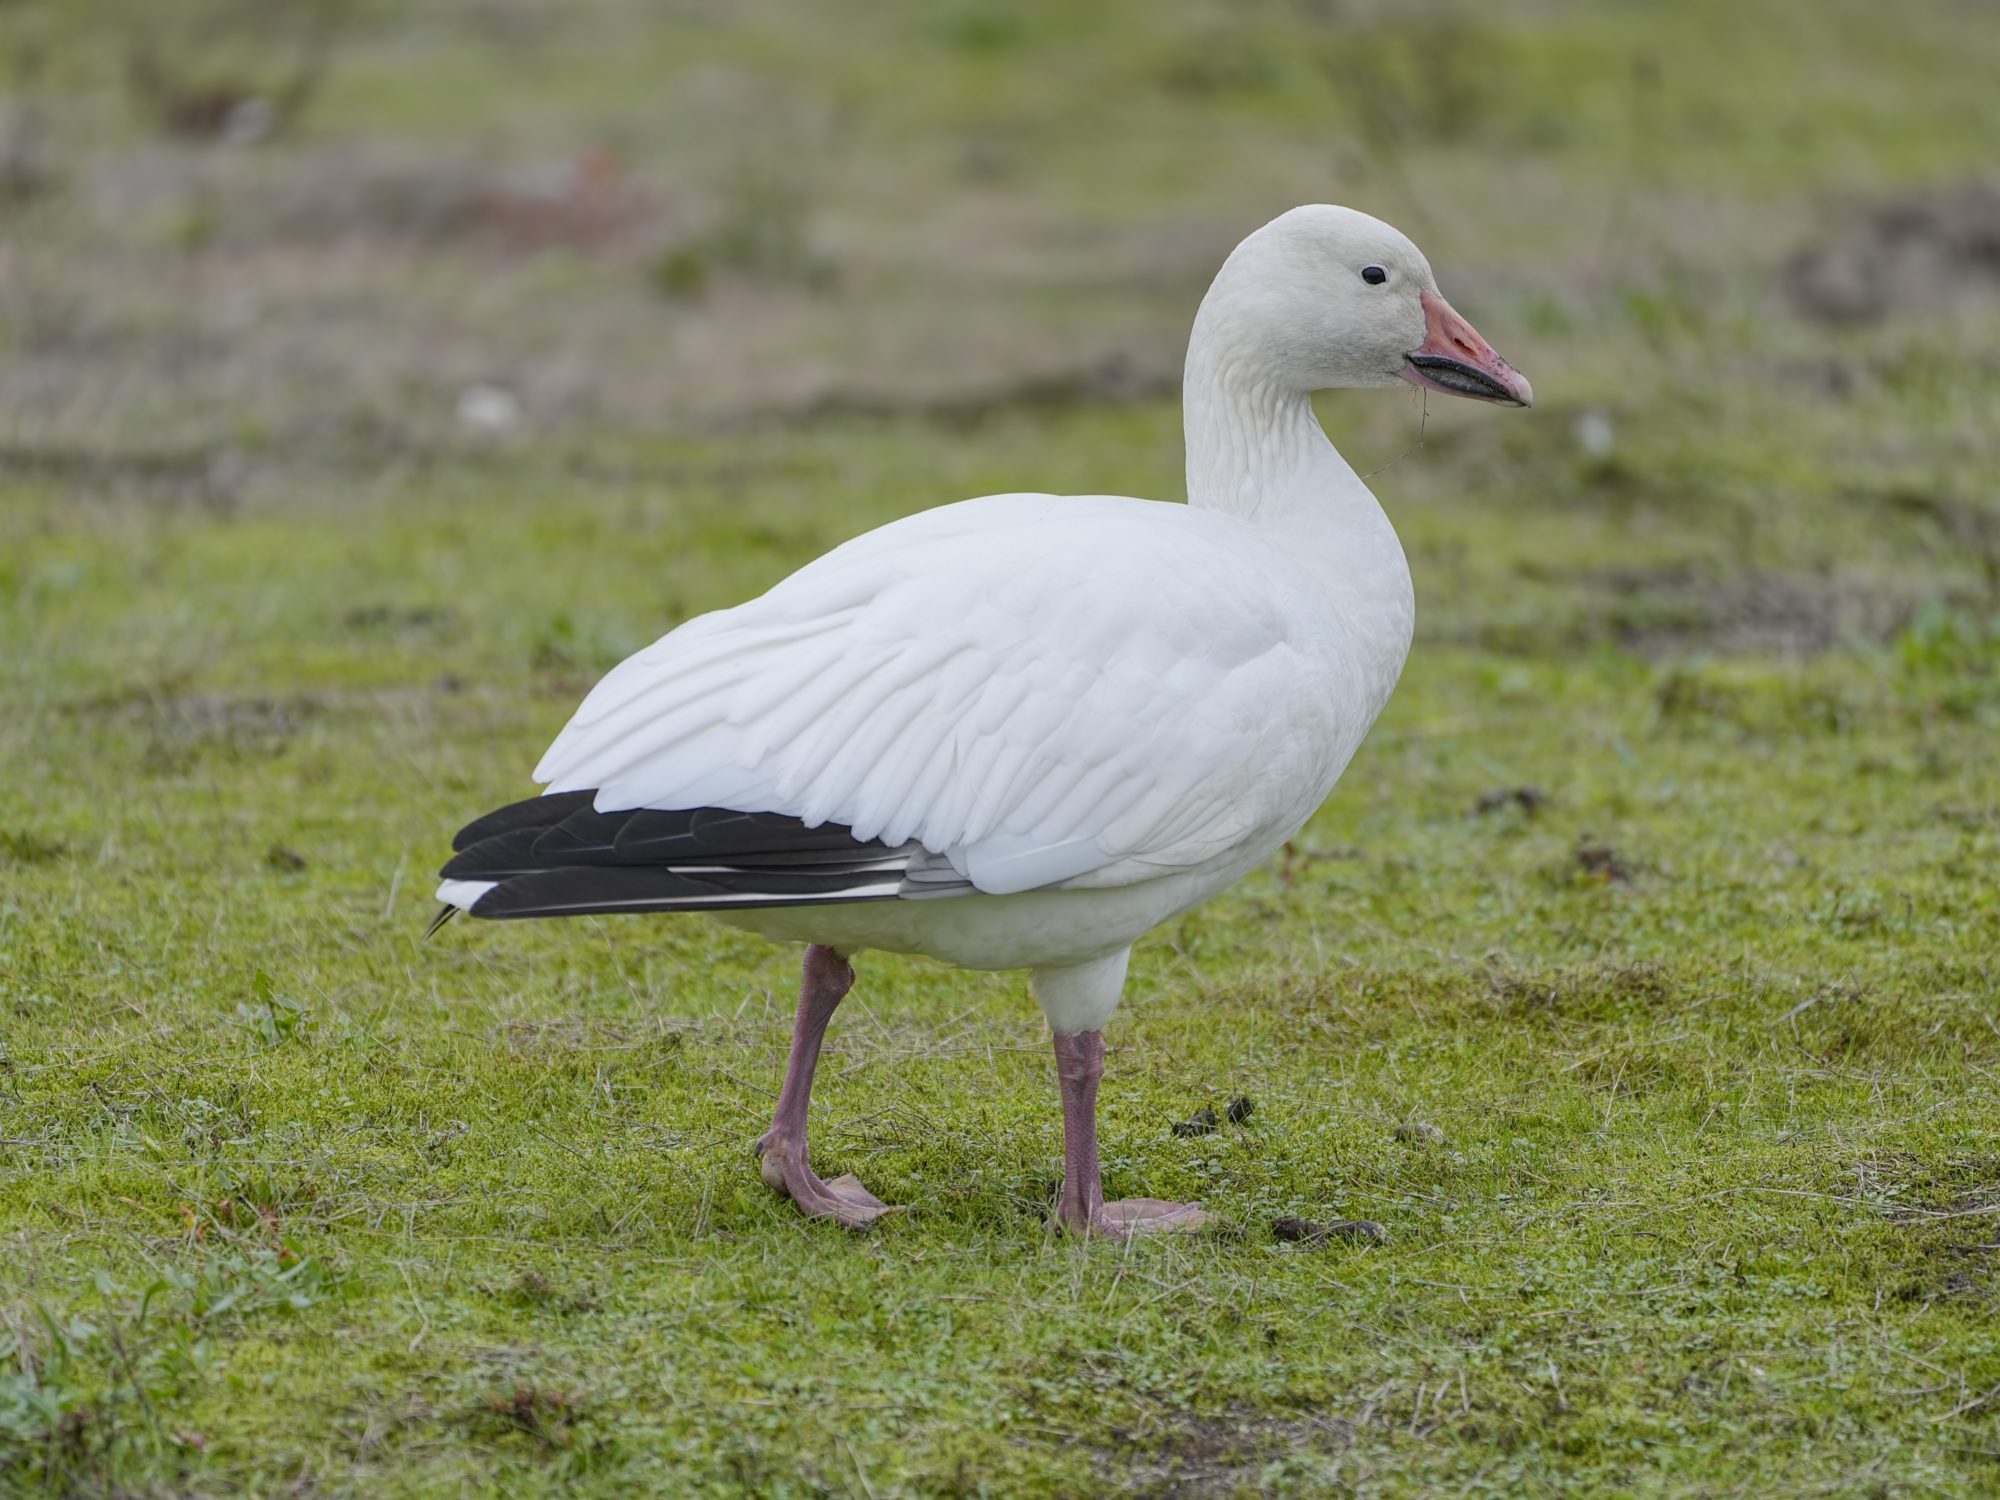 Adult Snow Goose standing on grass